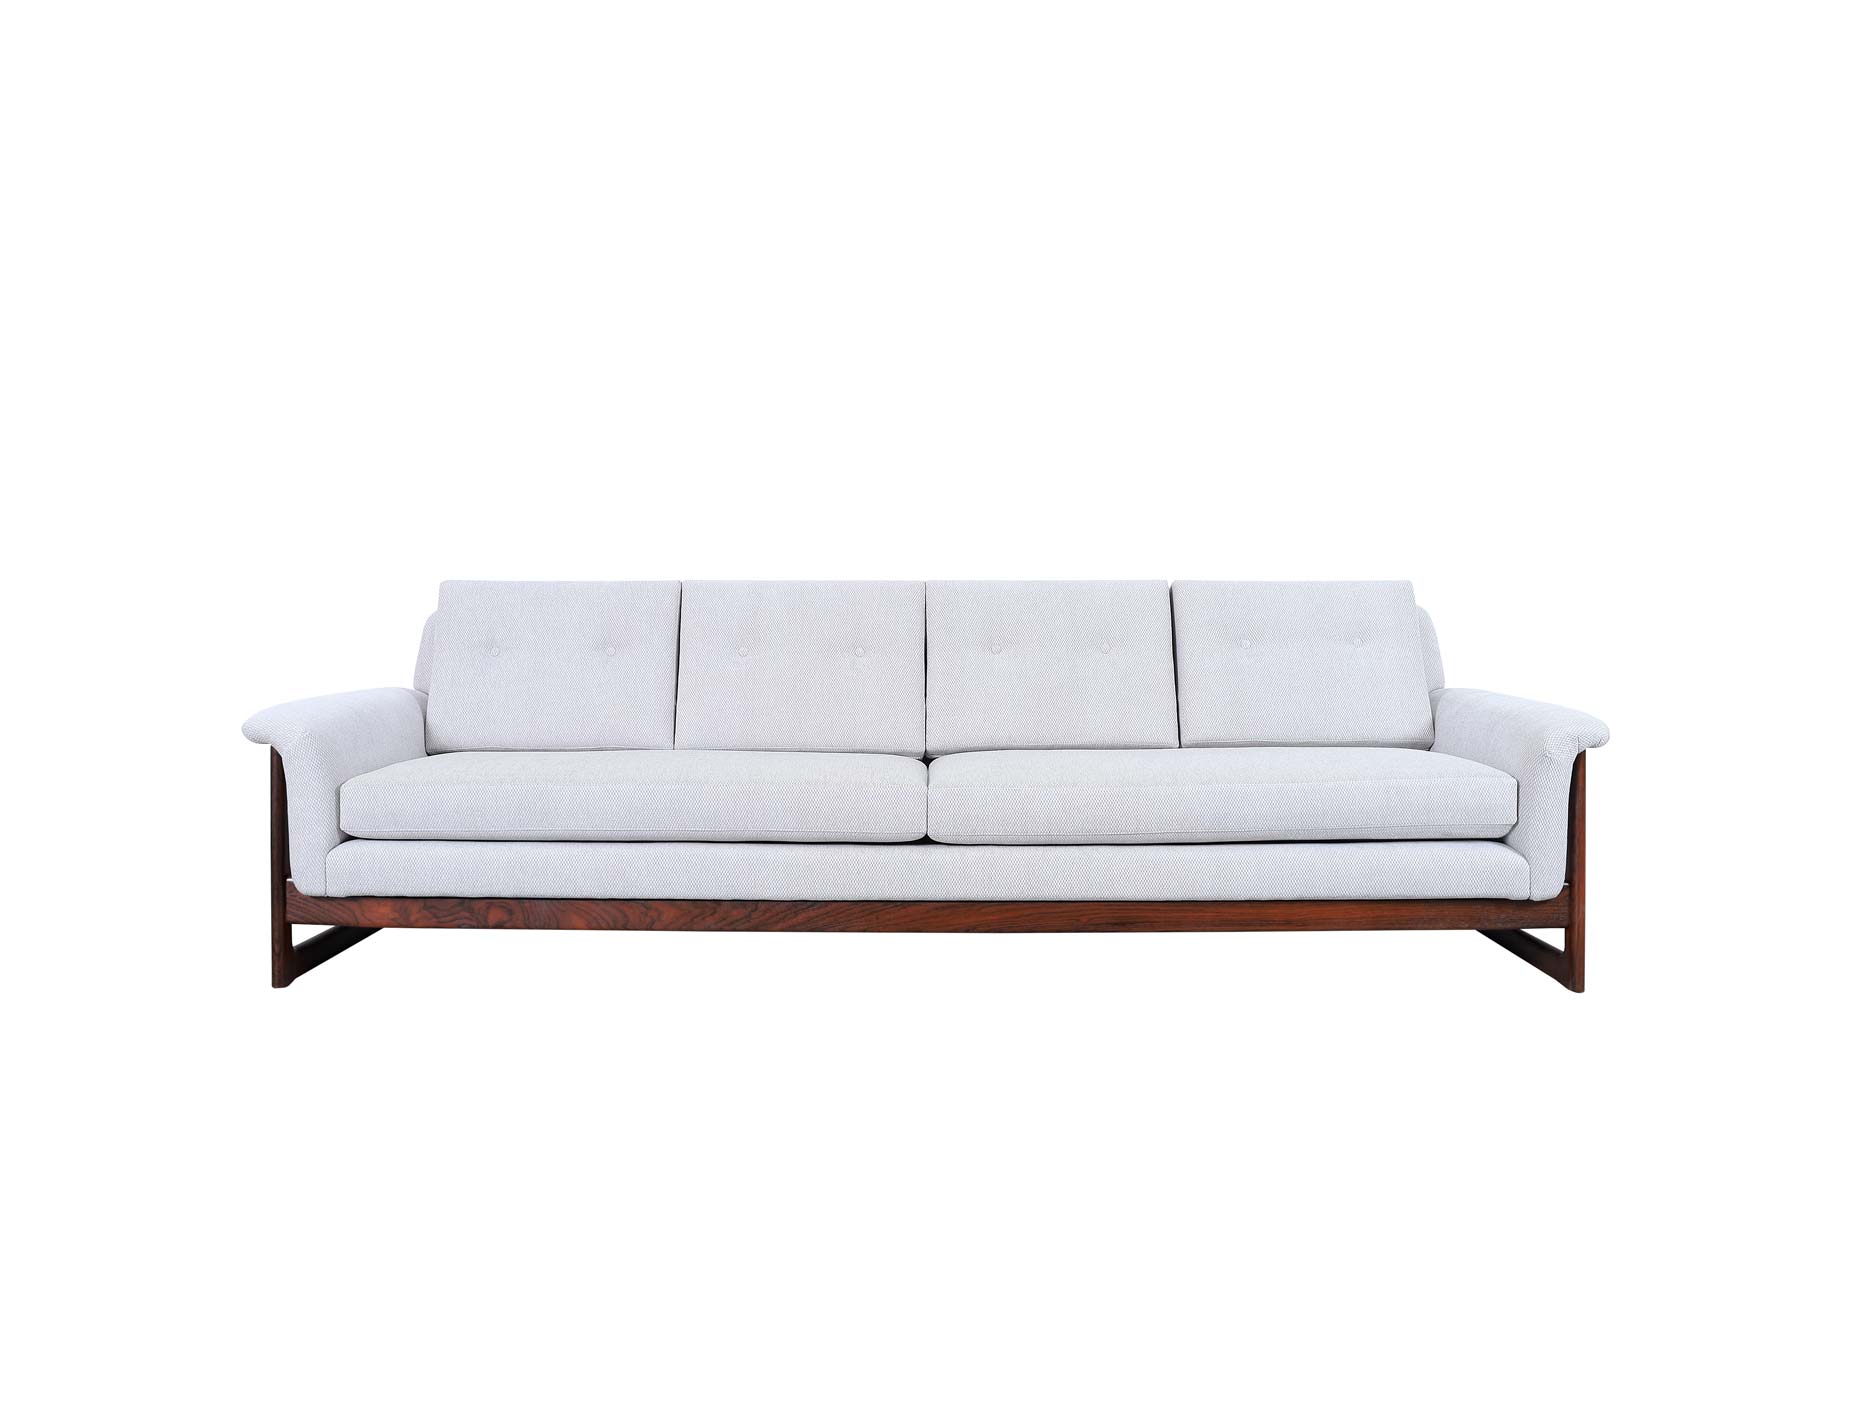 Swedish Rosewood Sofa by Folke Ohlsson for Dux